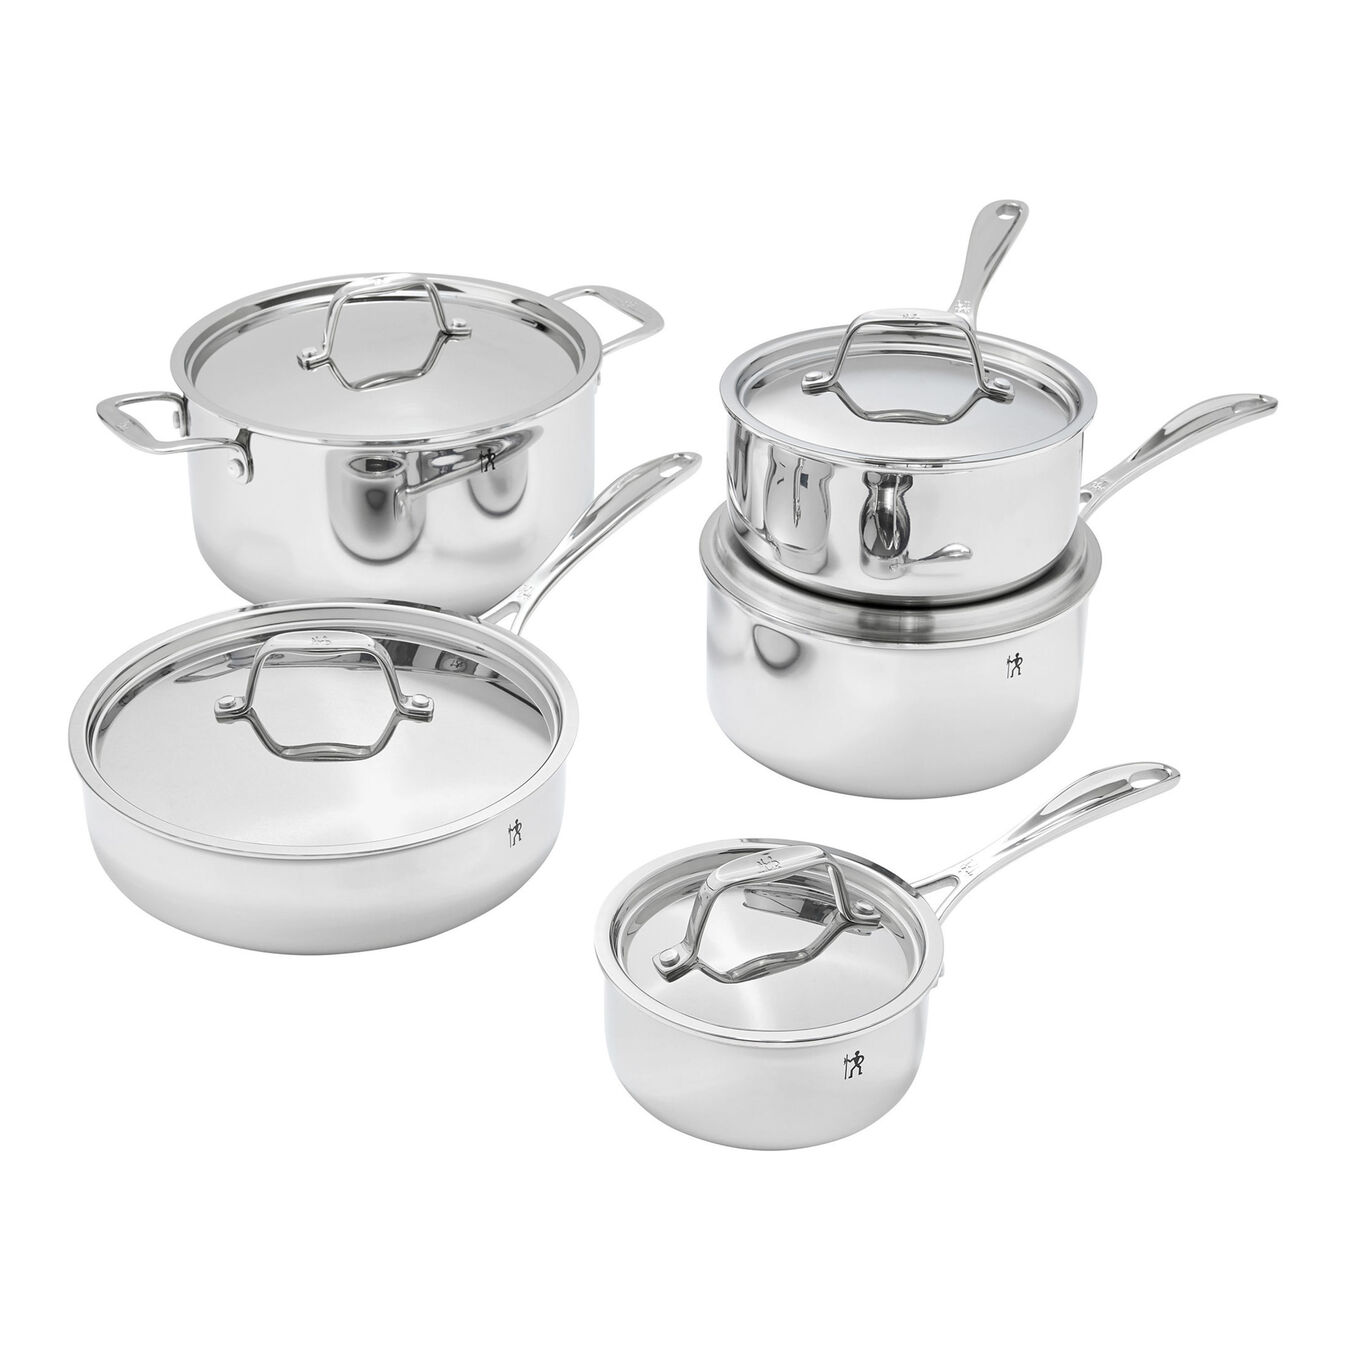 Pot set 10 Piece, 18/10 Stainless Steel,,large 1